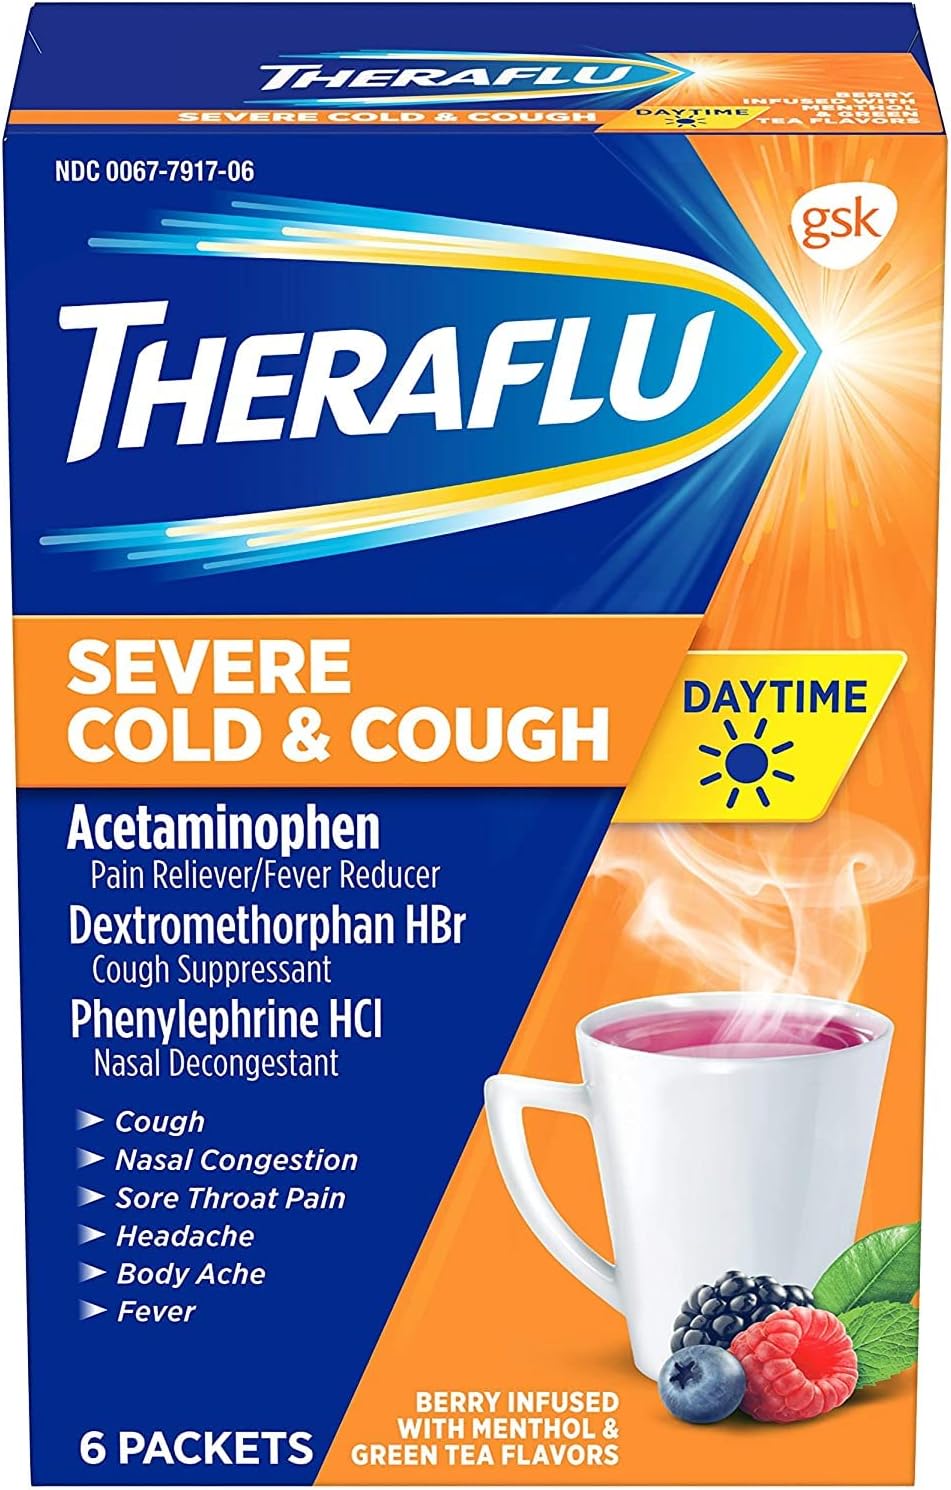 Theraflu Daytime Severe Cold & Cough Packets Berry Infused with Menthol & Green Tea Flavors - 6 ct, Pack of 2